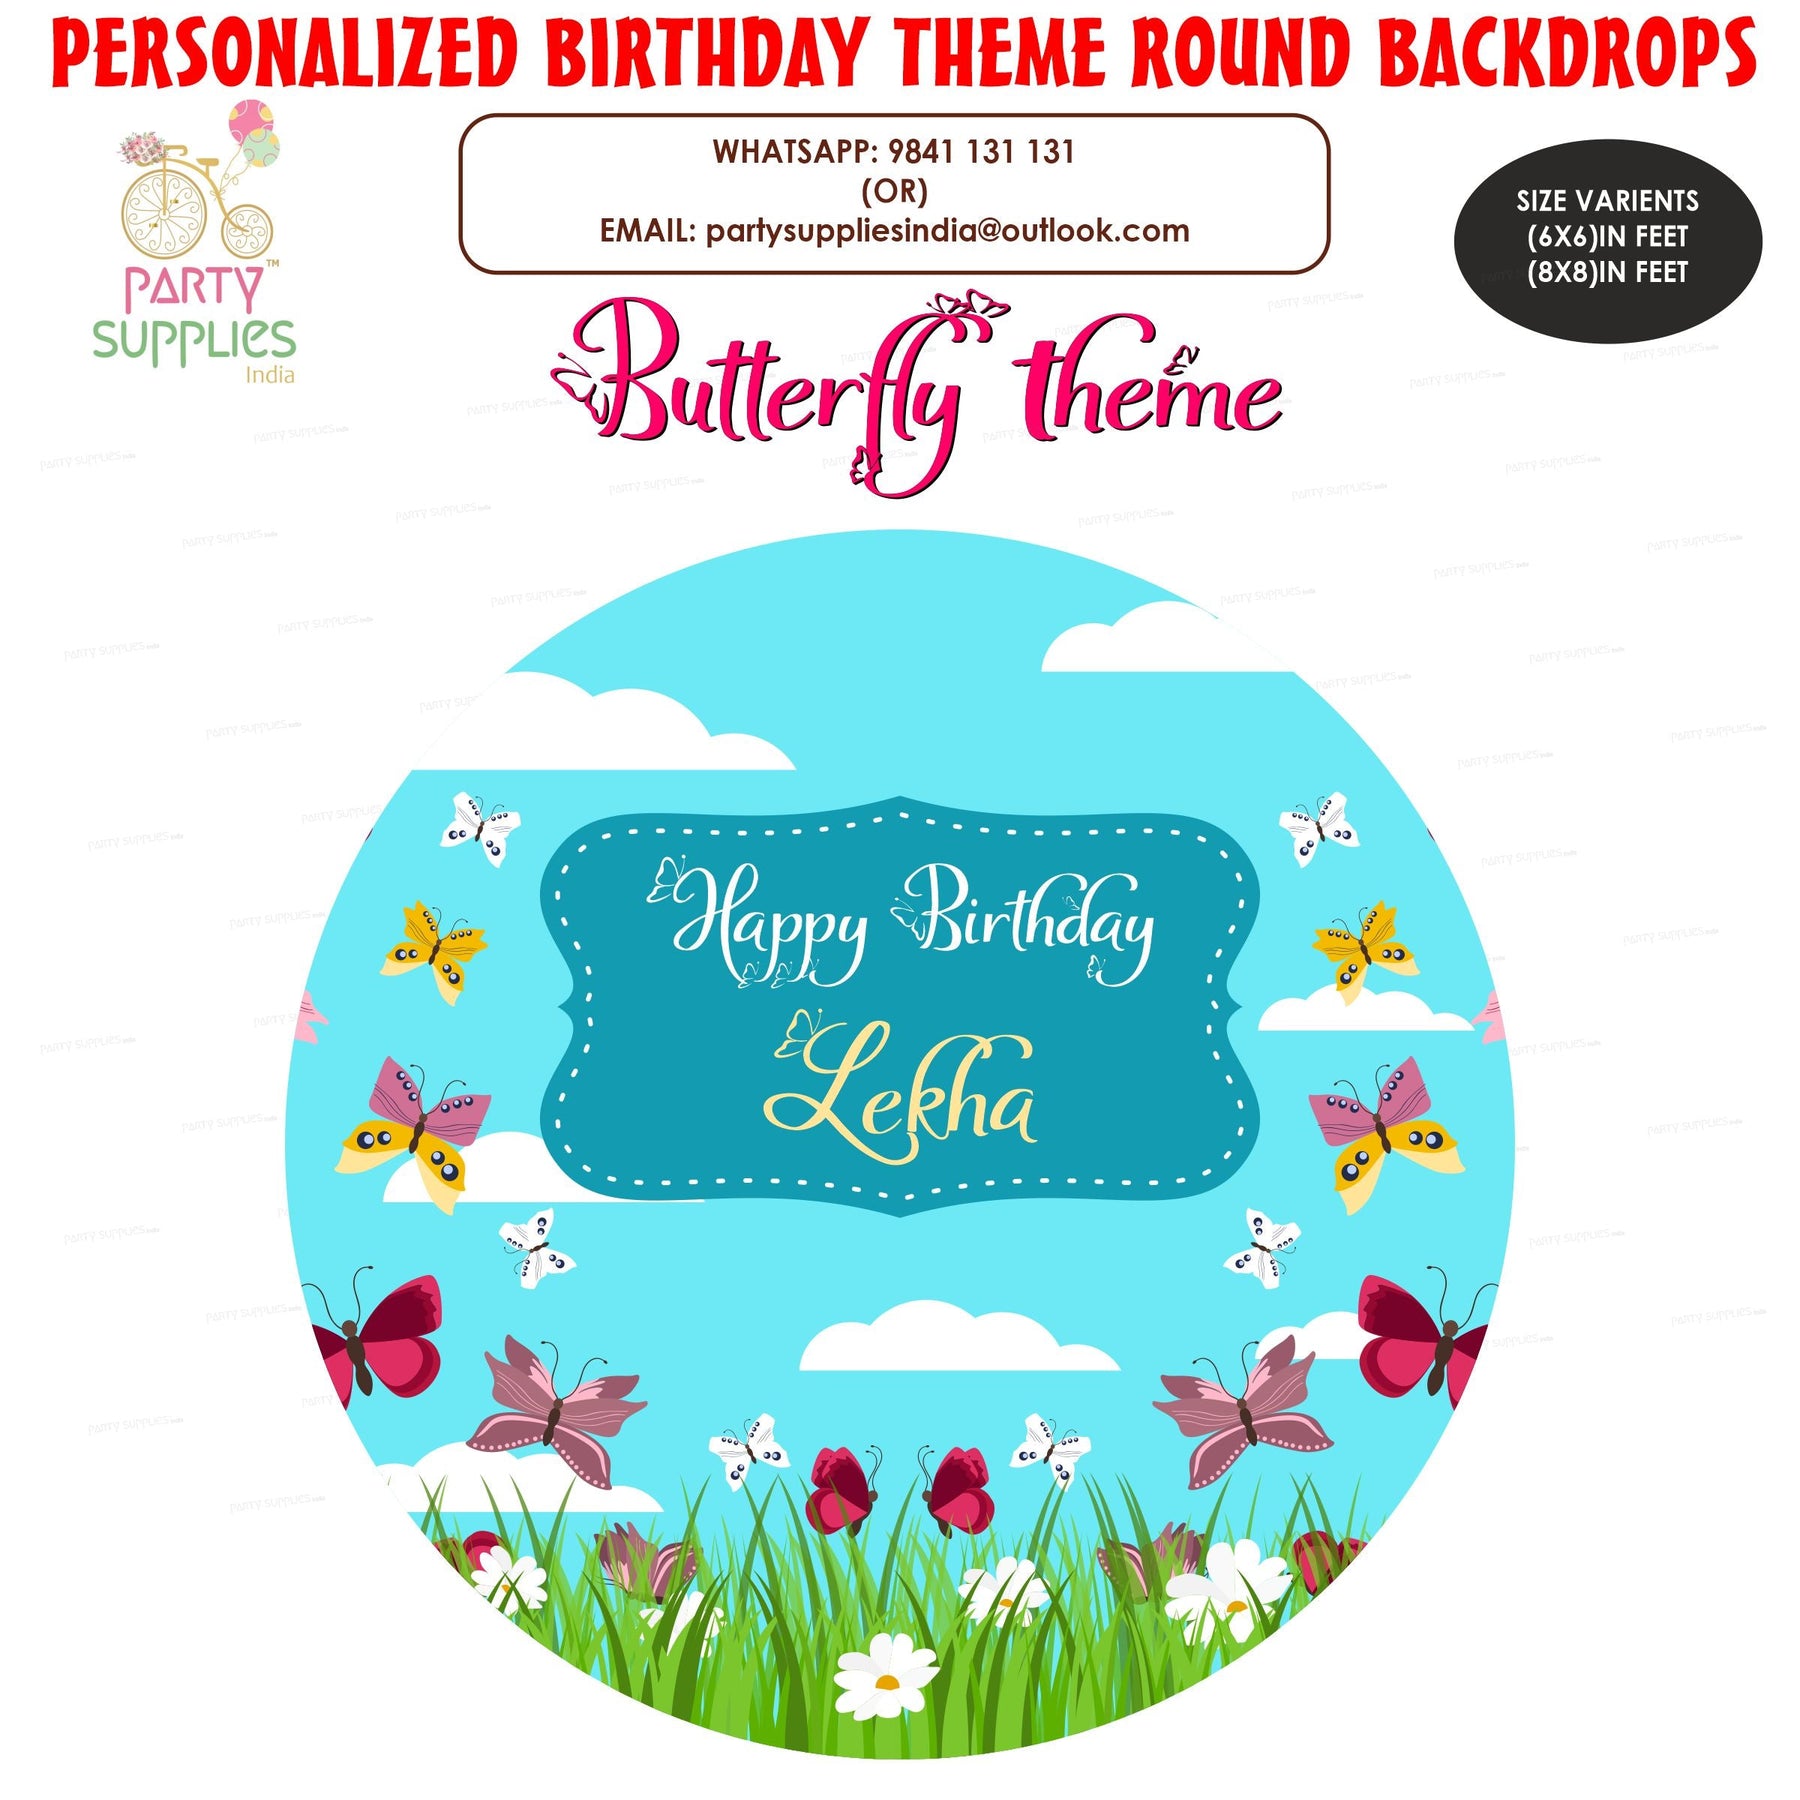 Butterfly Theme Customized Round Backdrop